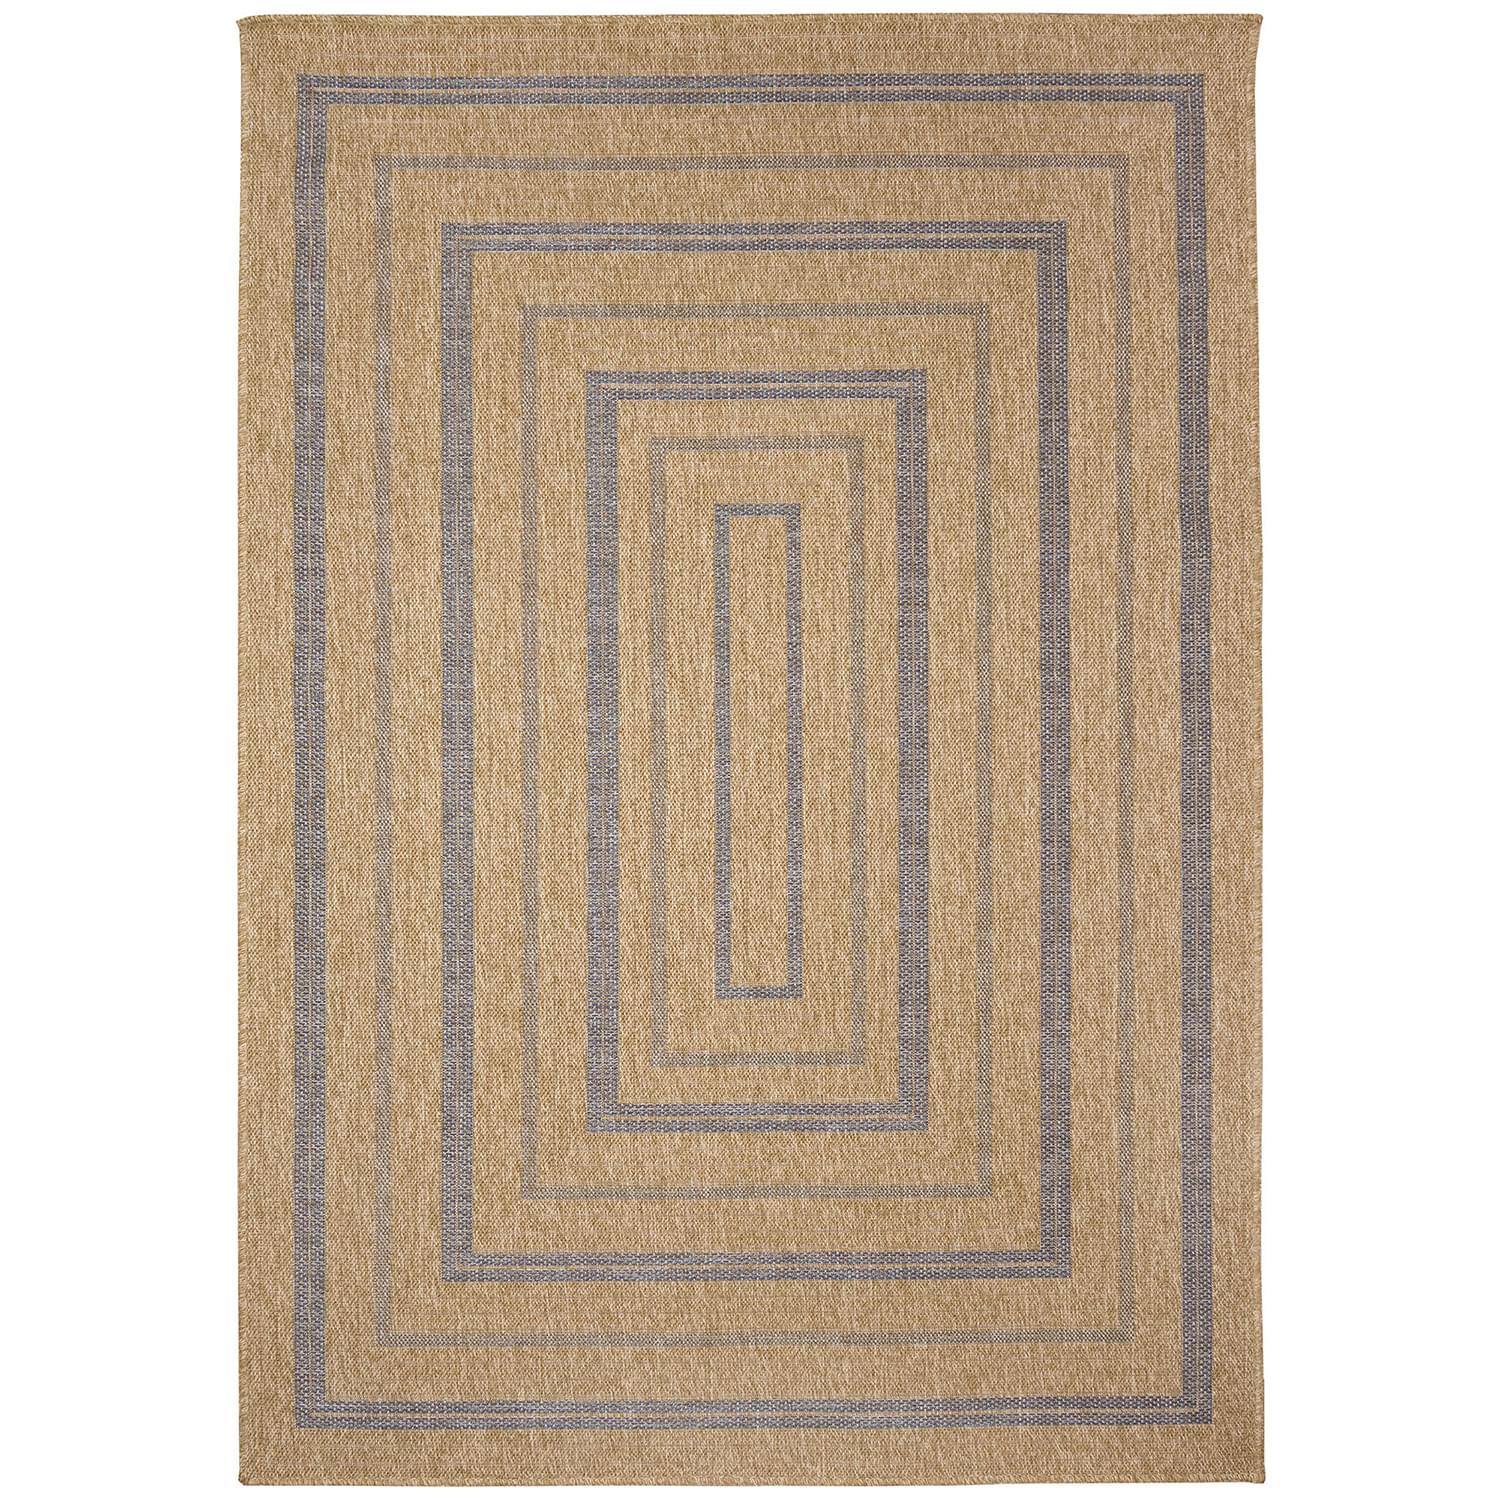 Liora Manne Sahara Low Profile  Easy Care Woven Weather Resistant Rug- Multi Border Navy  Product Image